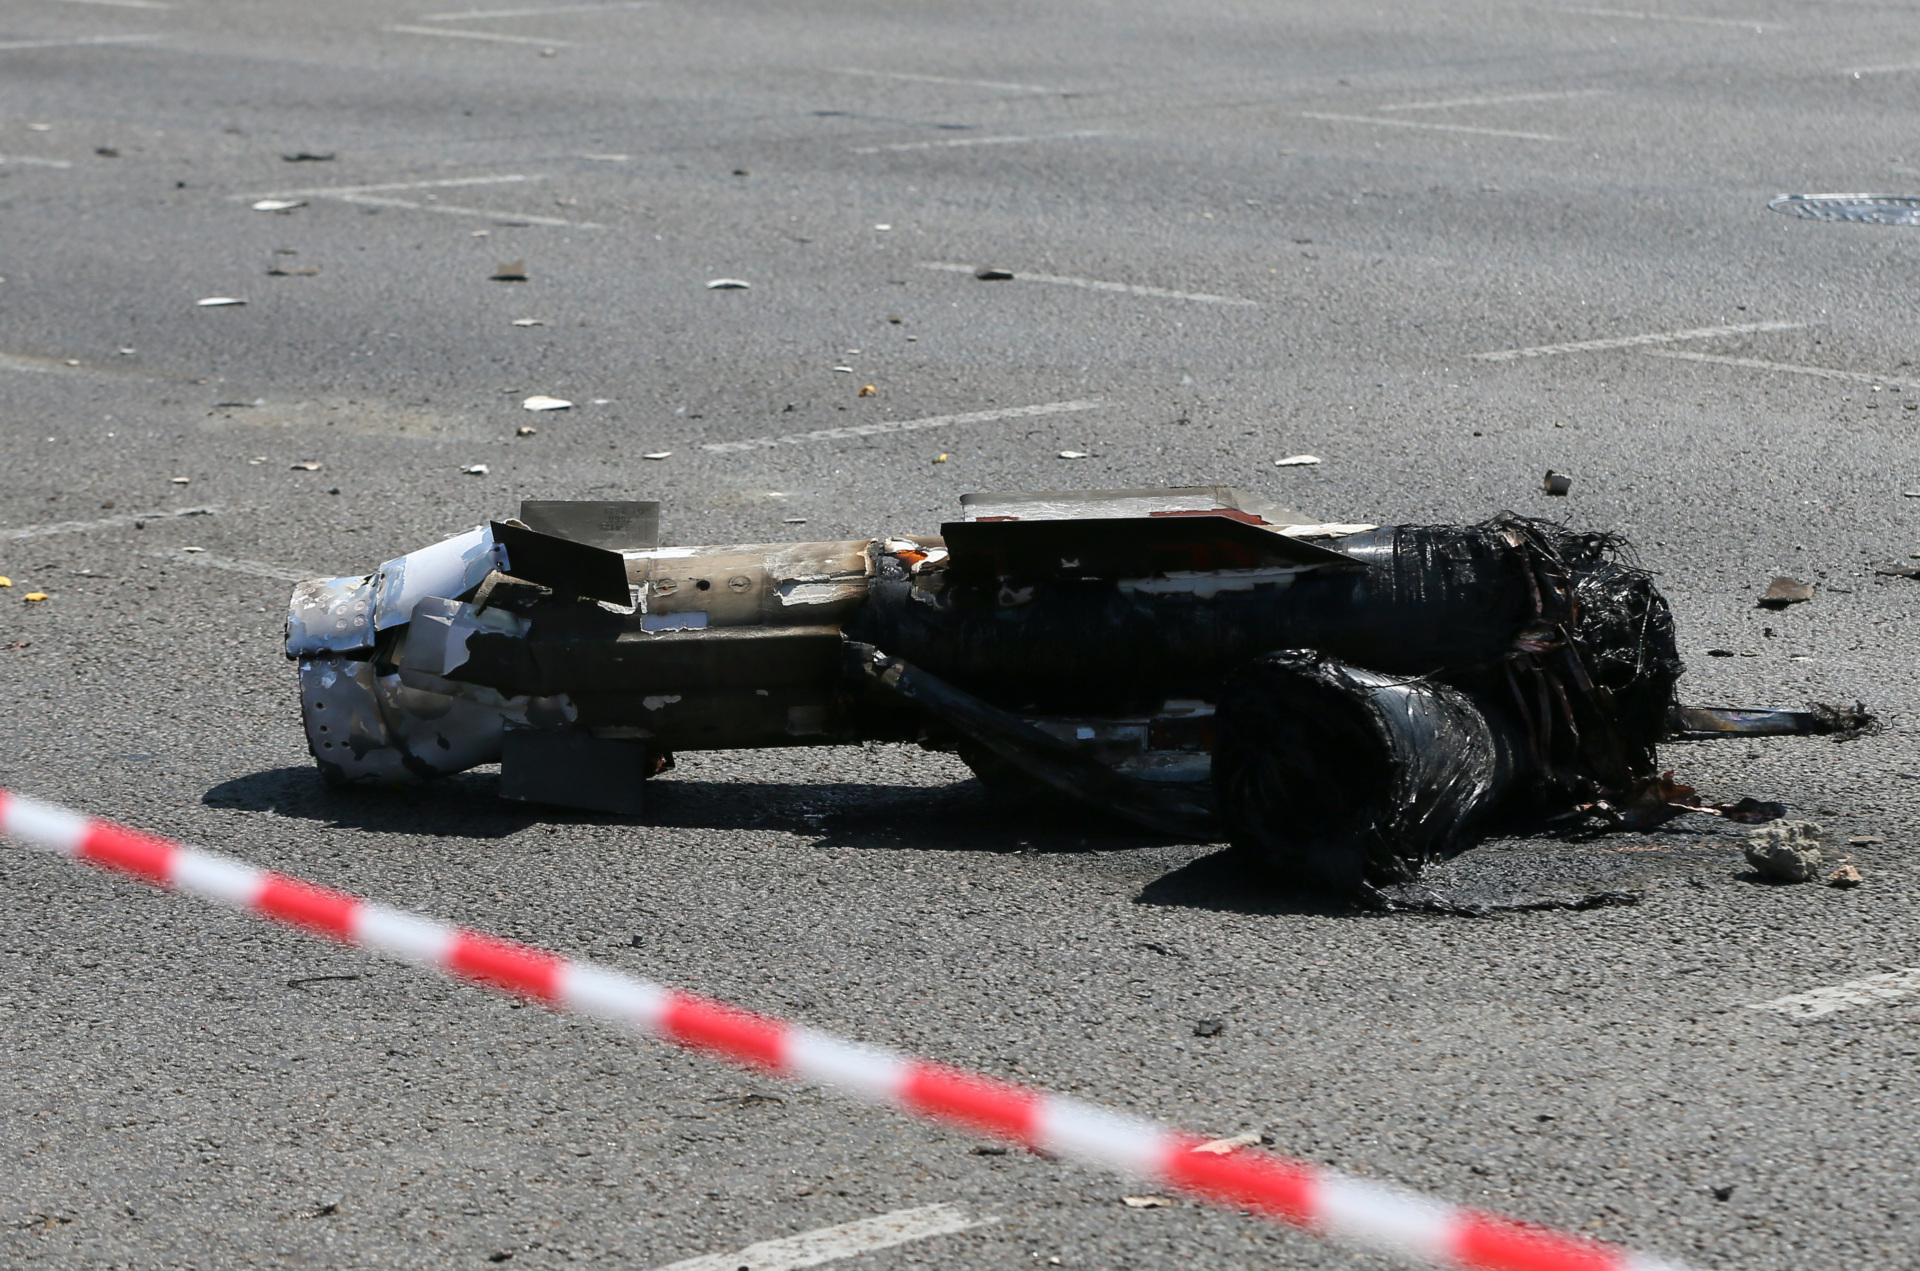 A part of a missile which landed on a street is seen after a Russian missile strike in Kyiv, Ukraine 29 May 2023, amid Russia's invasion of Ukraine. Second time in a day, Russia fired 11 Iskander-M and Iskander-K ballistic and cruise missiles at Kyiv region, and the Ukraine's air defense forces destroyed all the targets, according Ukrinform reports this with reference to the Telegram channel of the Commander-in-Chief of the Armed Forces of Ukraine. (Photo by STR/NurPhoto via Getty Images)